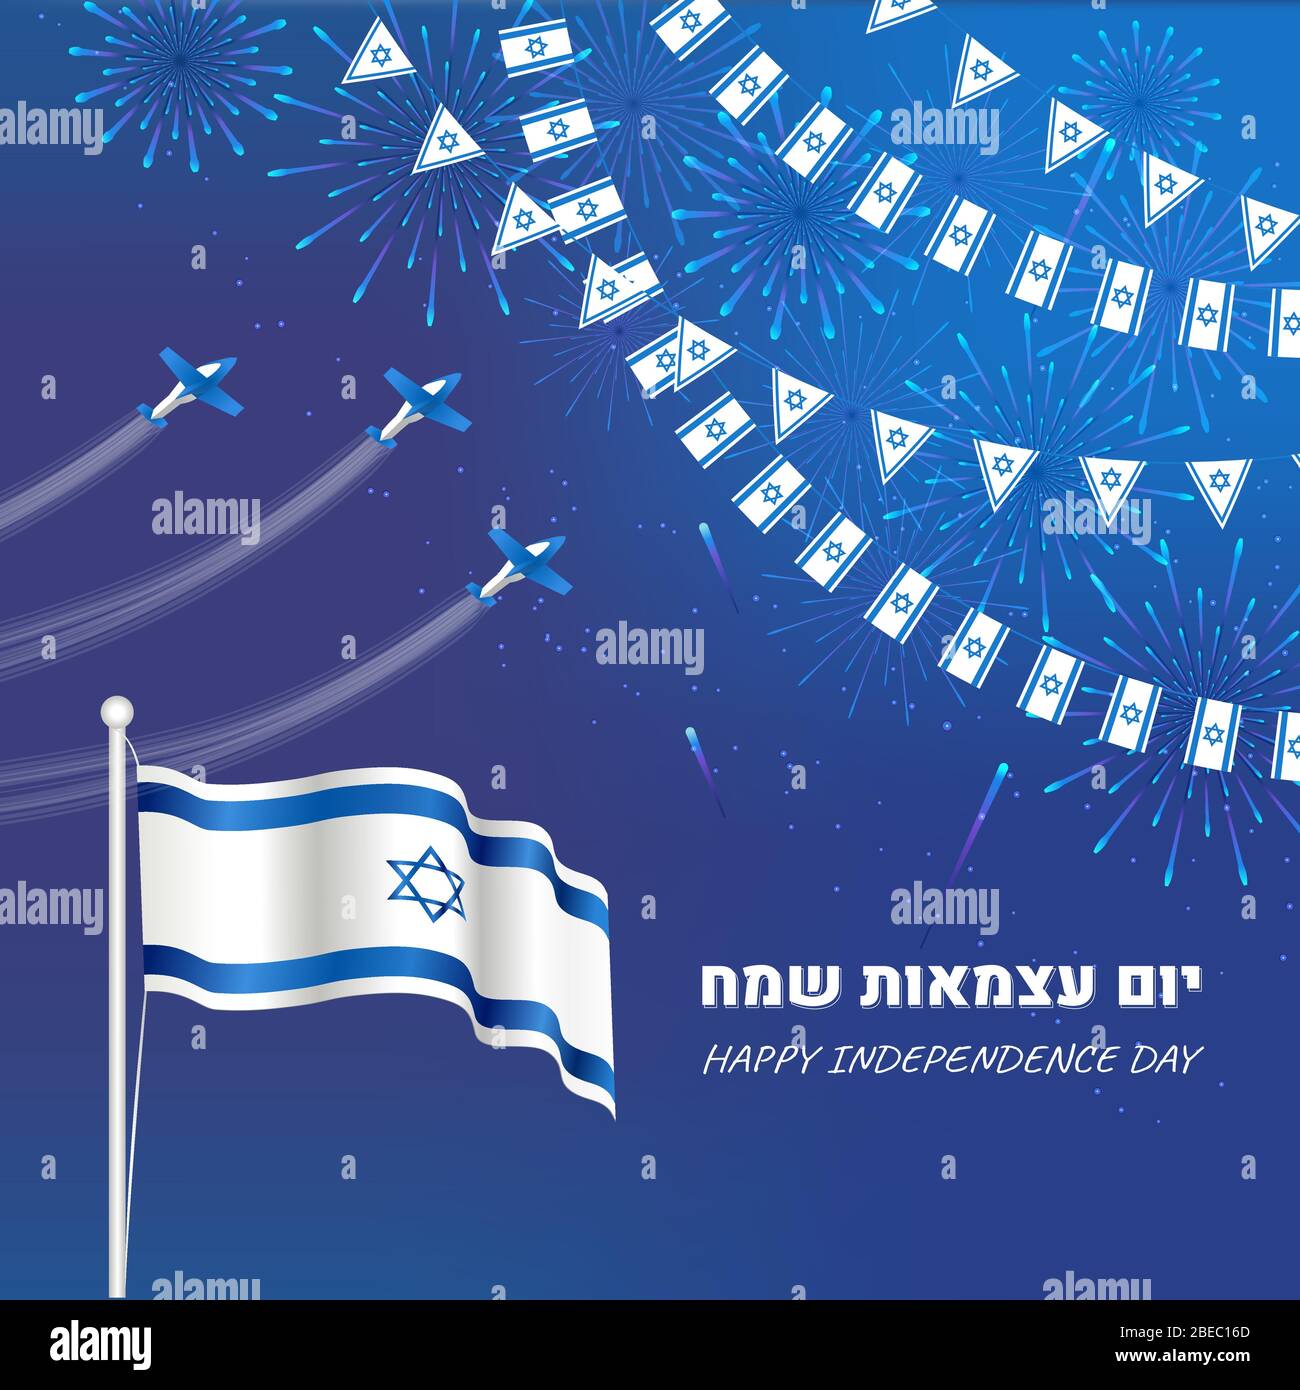 Israel independence day banner with flags, planes, and fireworks Stock Vector